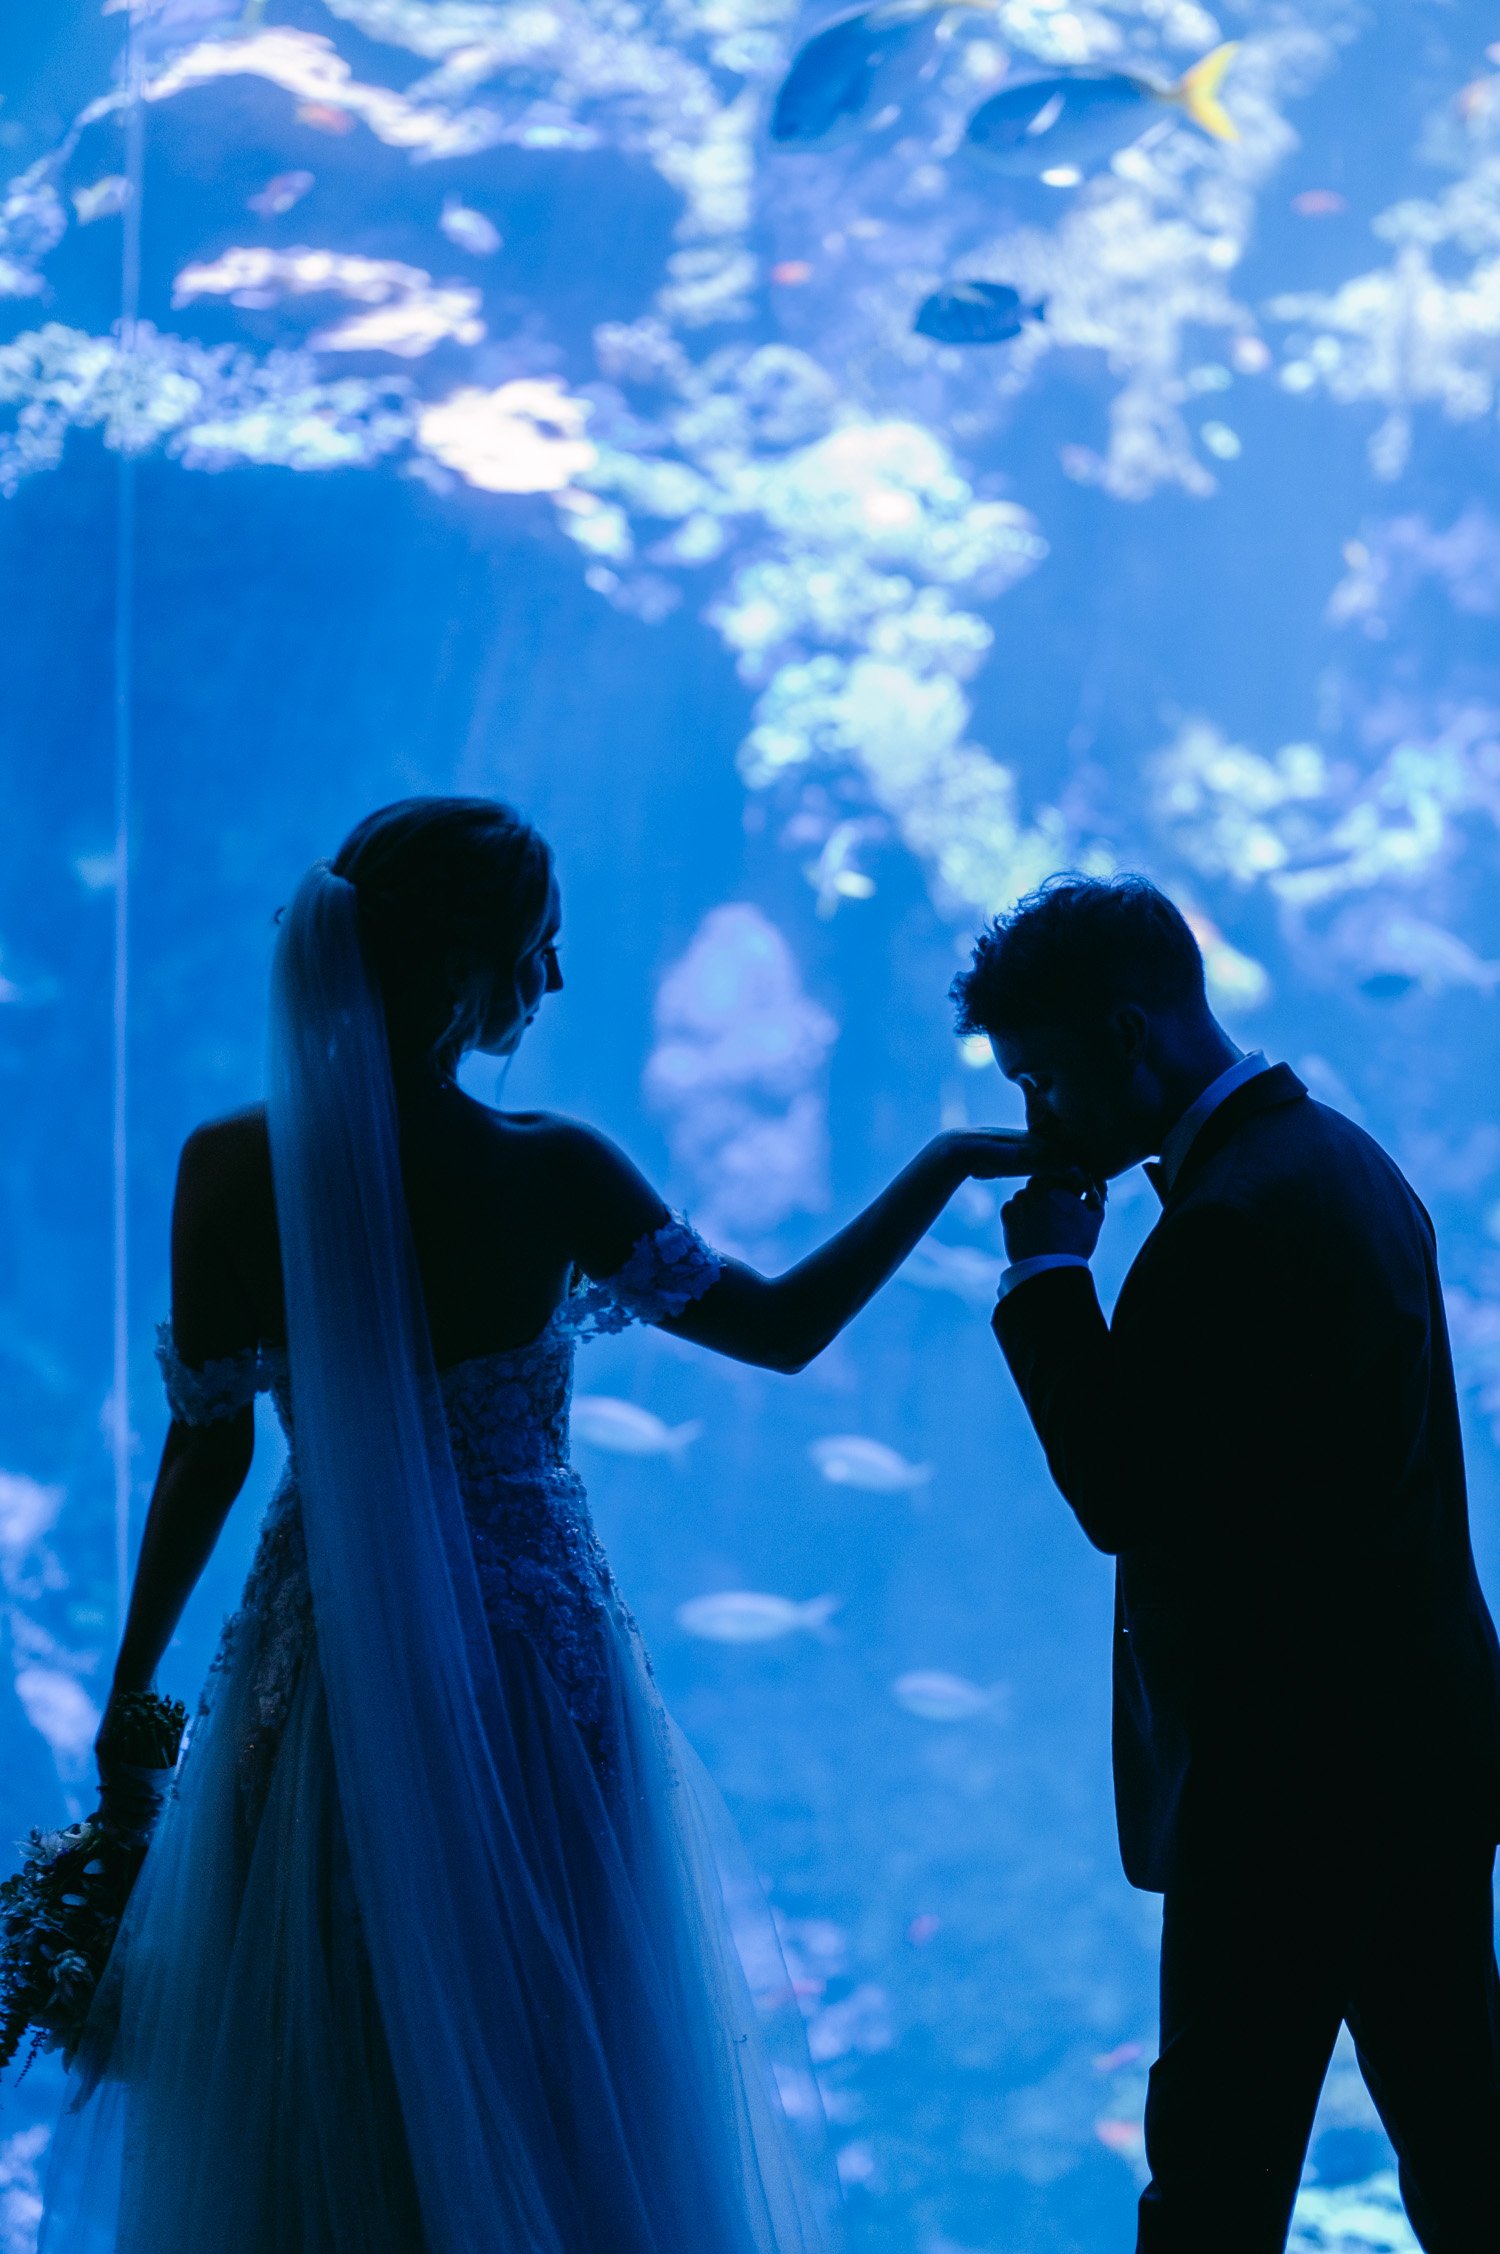 California academy of Sciences in San Francisco Wedding, photo of the groom kissing the bride’s hand inside the big aquarium with fishes